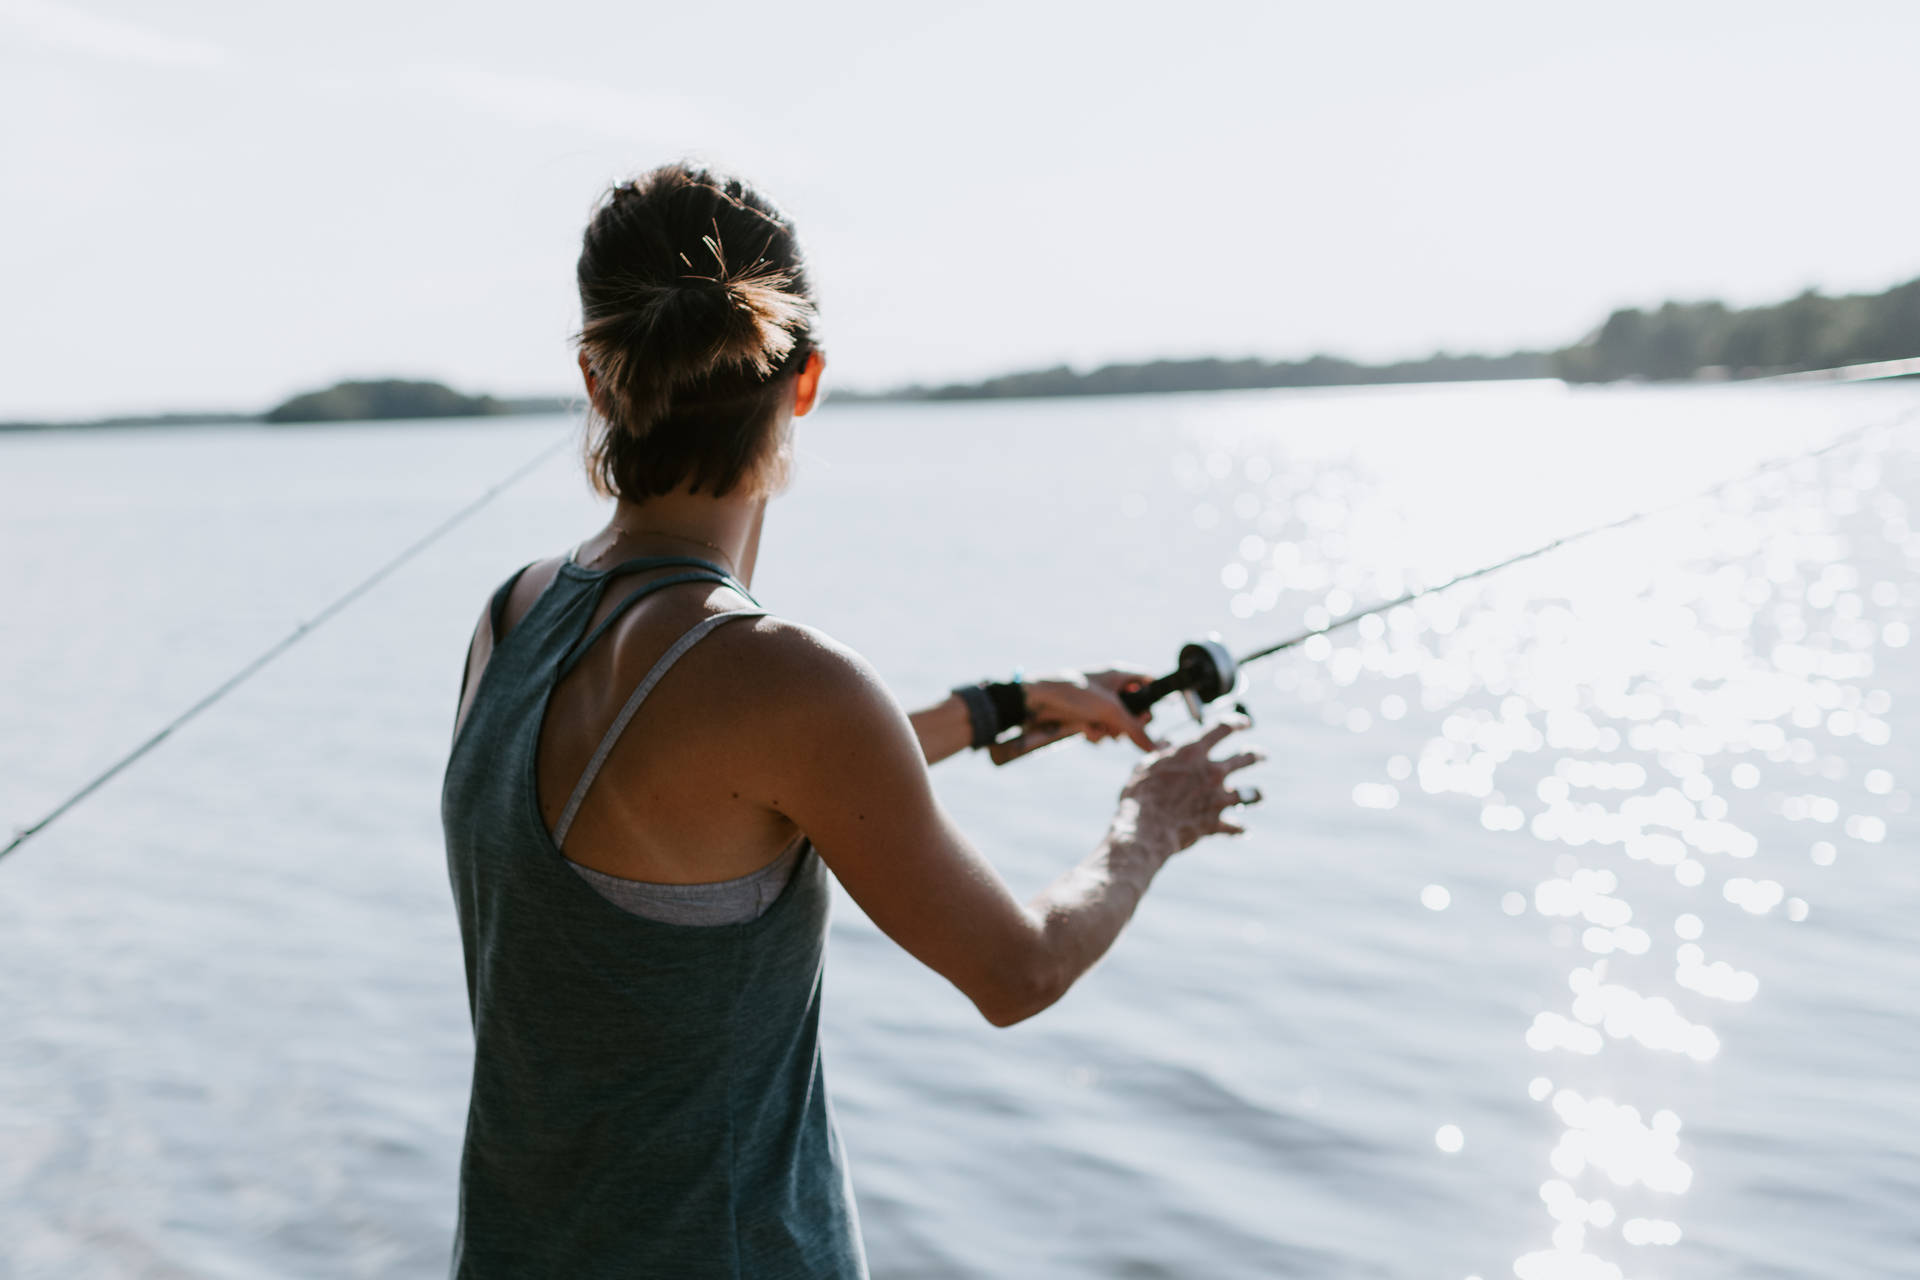 Fishing 5568X3712 Wallpaper and Background Image